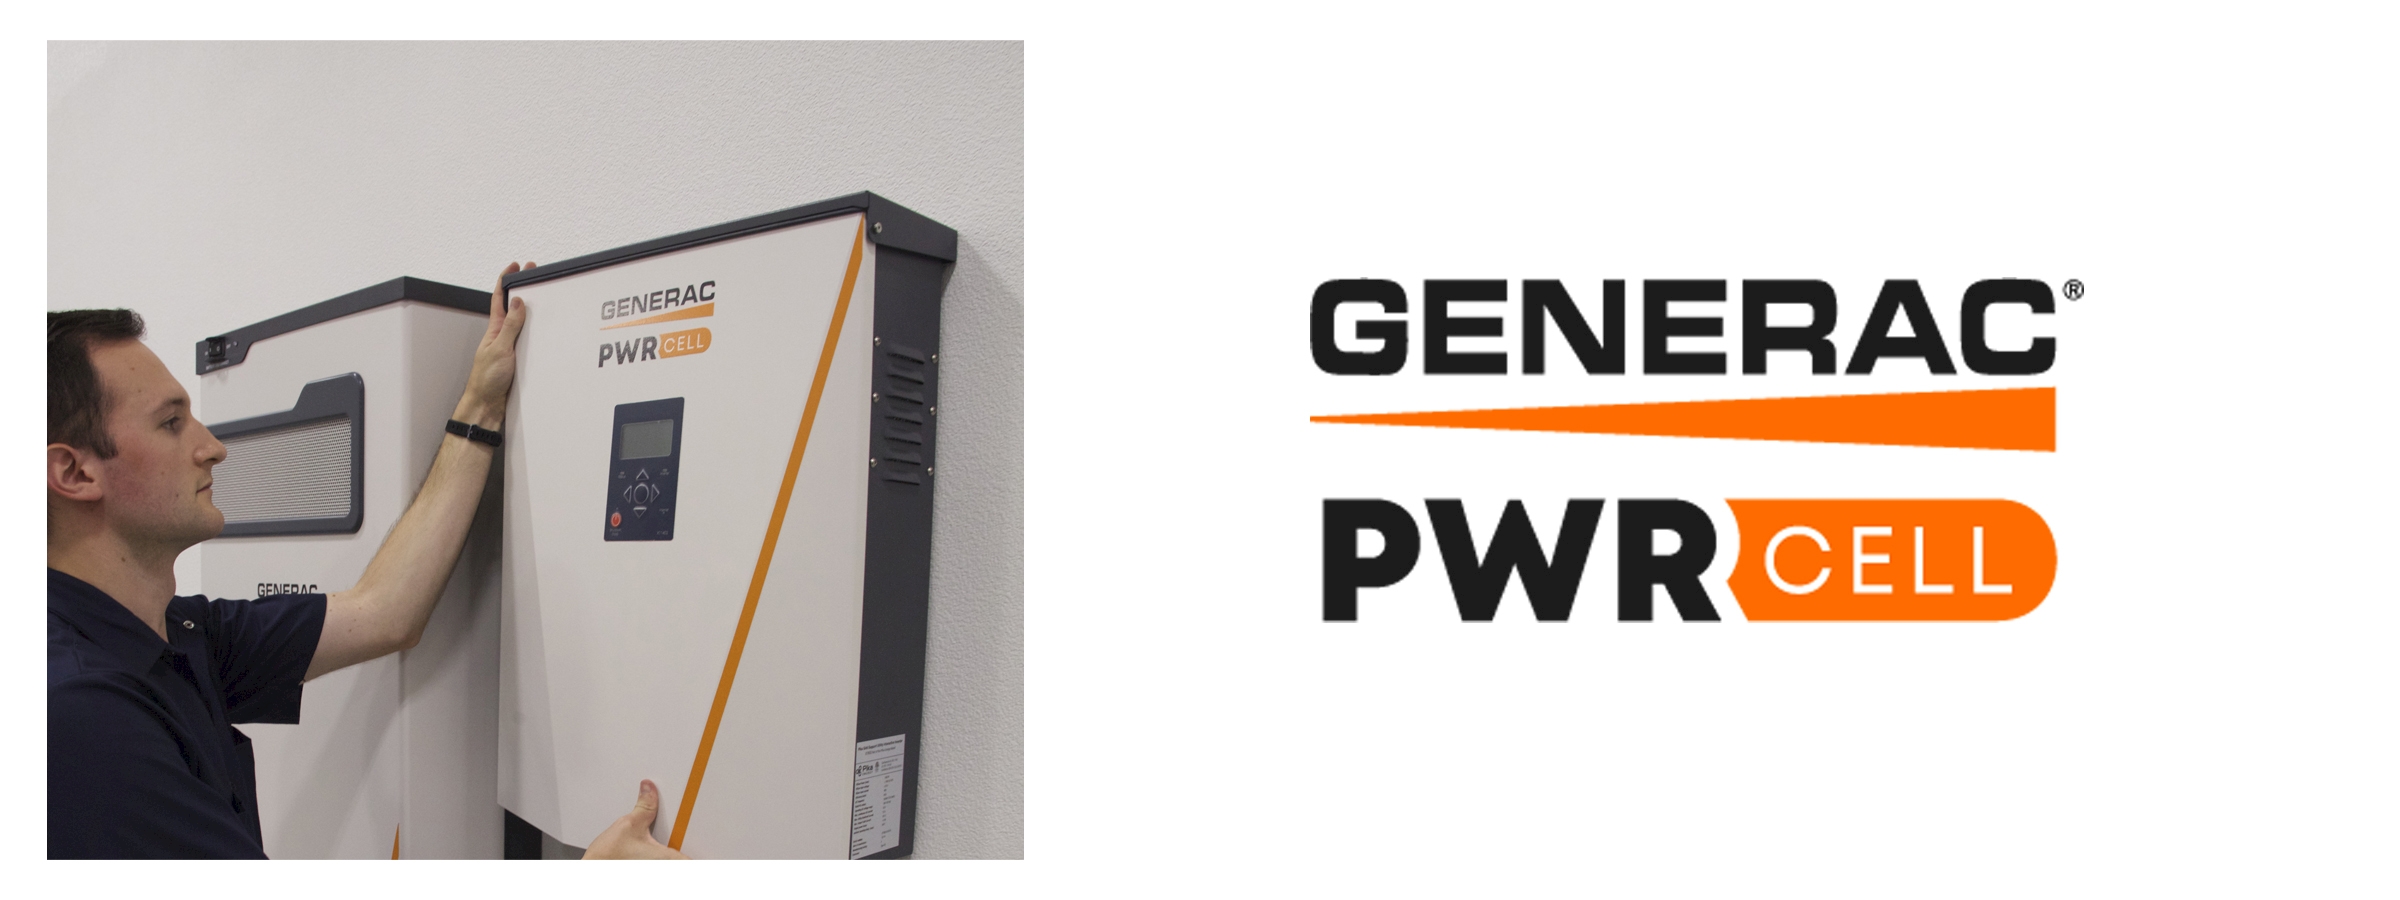 Boston Solar announces a partnership with Generac to offer PWRcell solar batteries